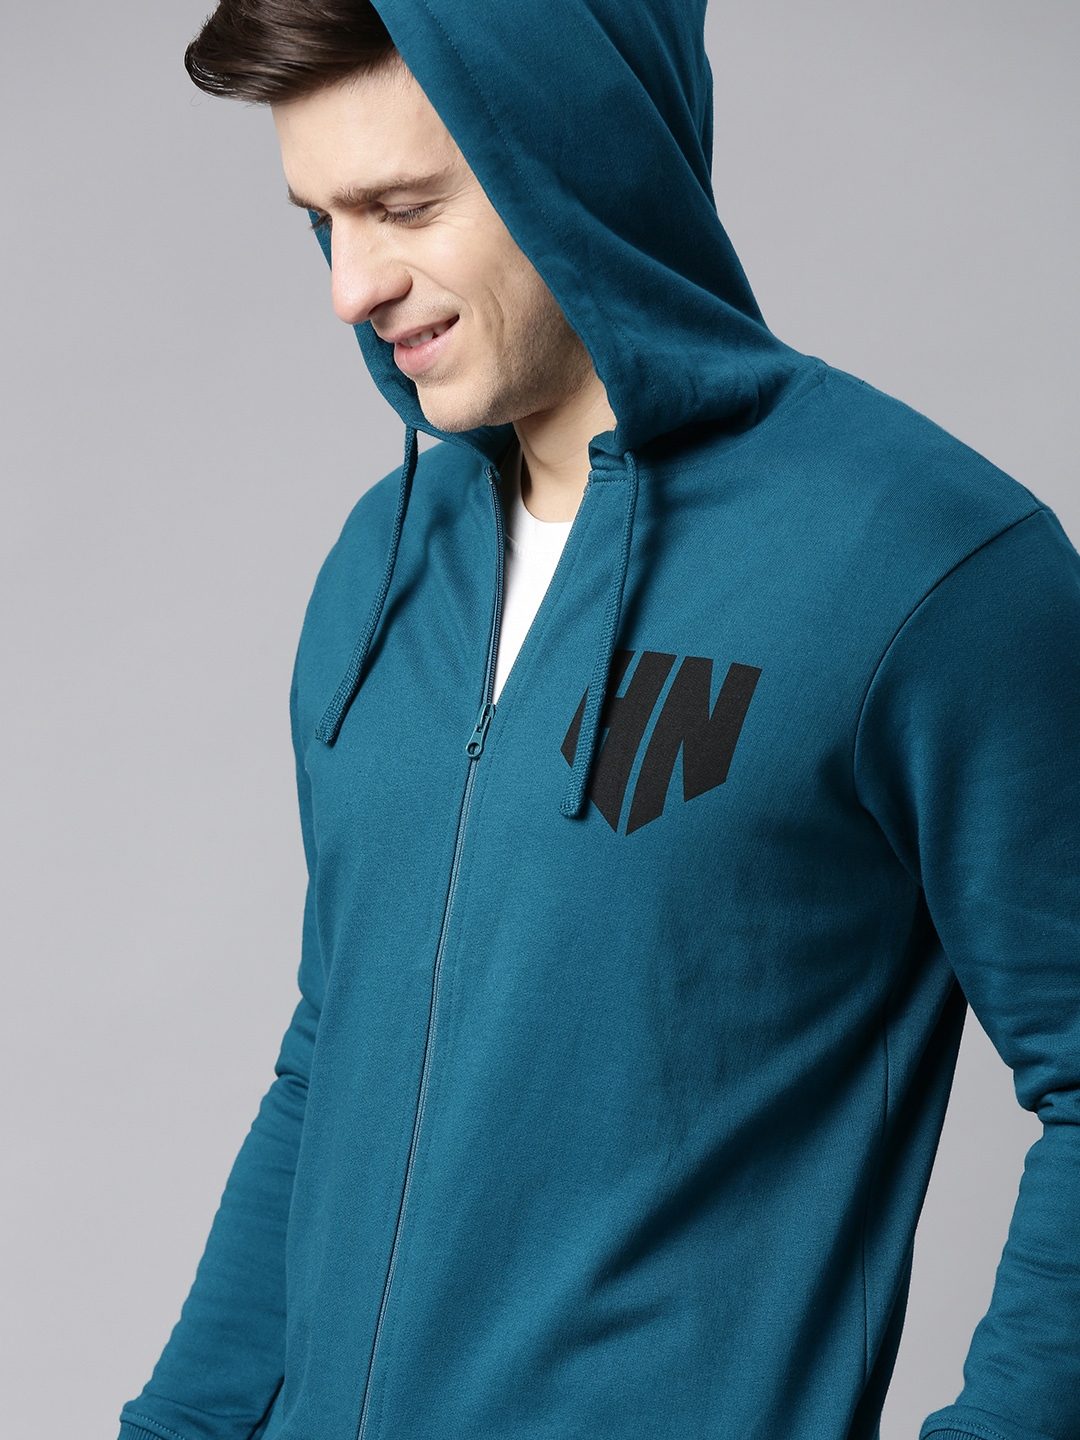 Buy HERE&NOW Men Teal Blue Hooded Front Open Sweatshirt With Printed ...